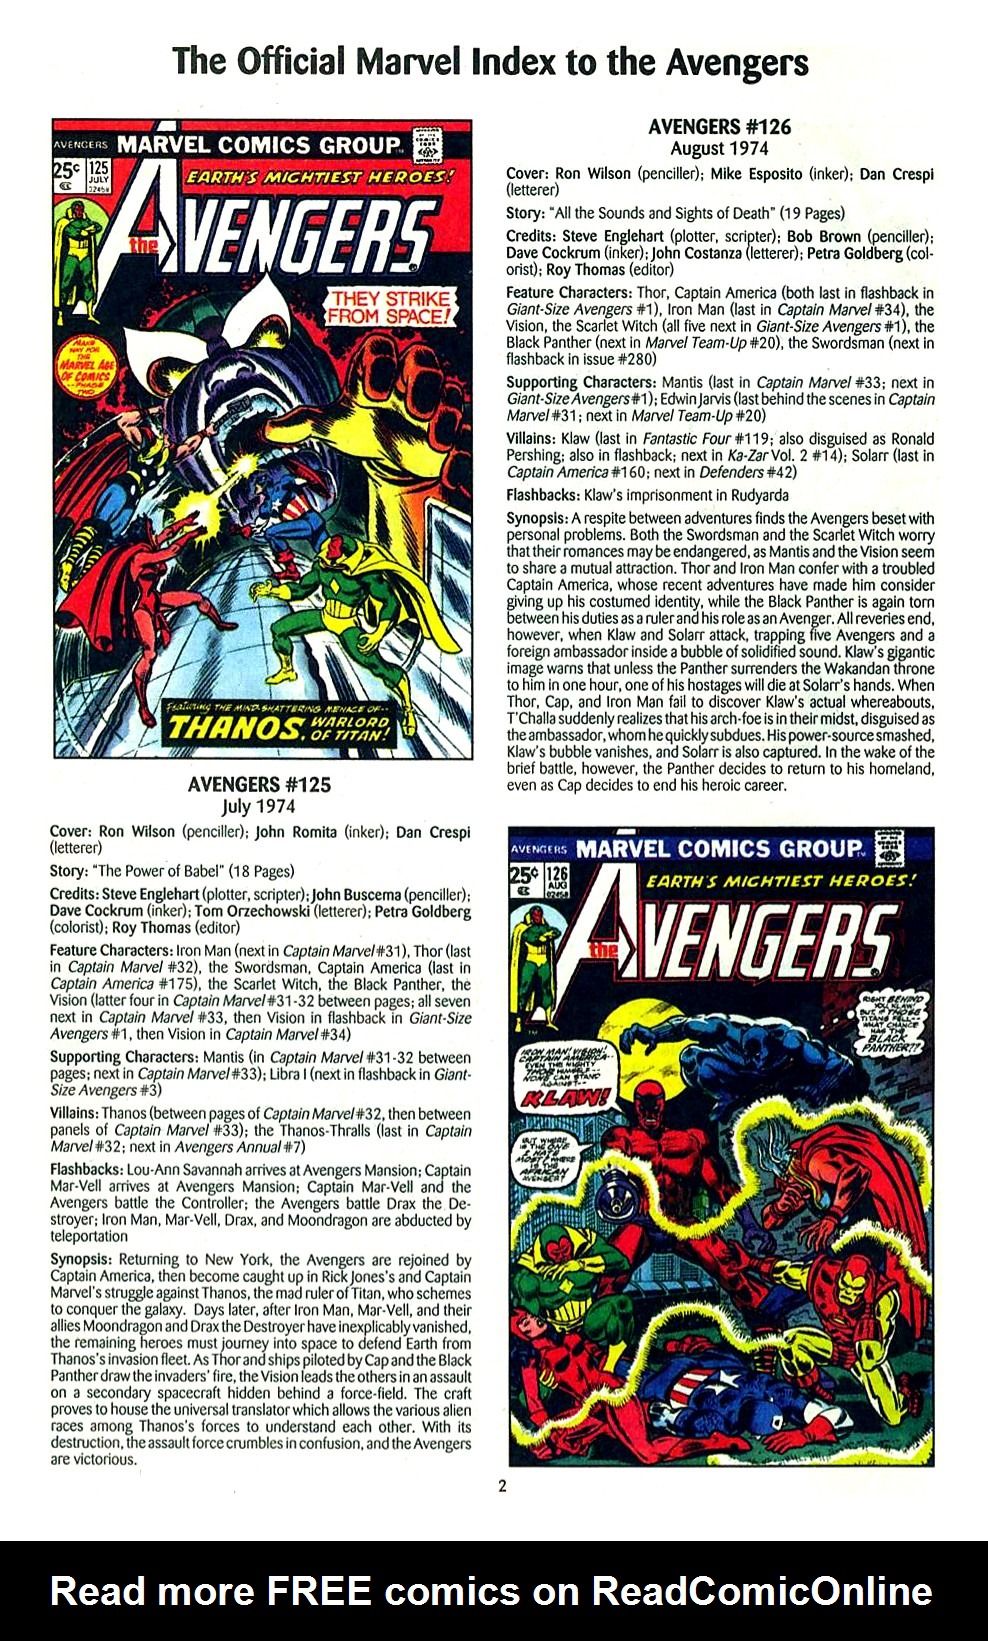 Read online The Official Marvel Index to the Avengers comic -  Issue #3 - 4